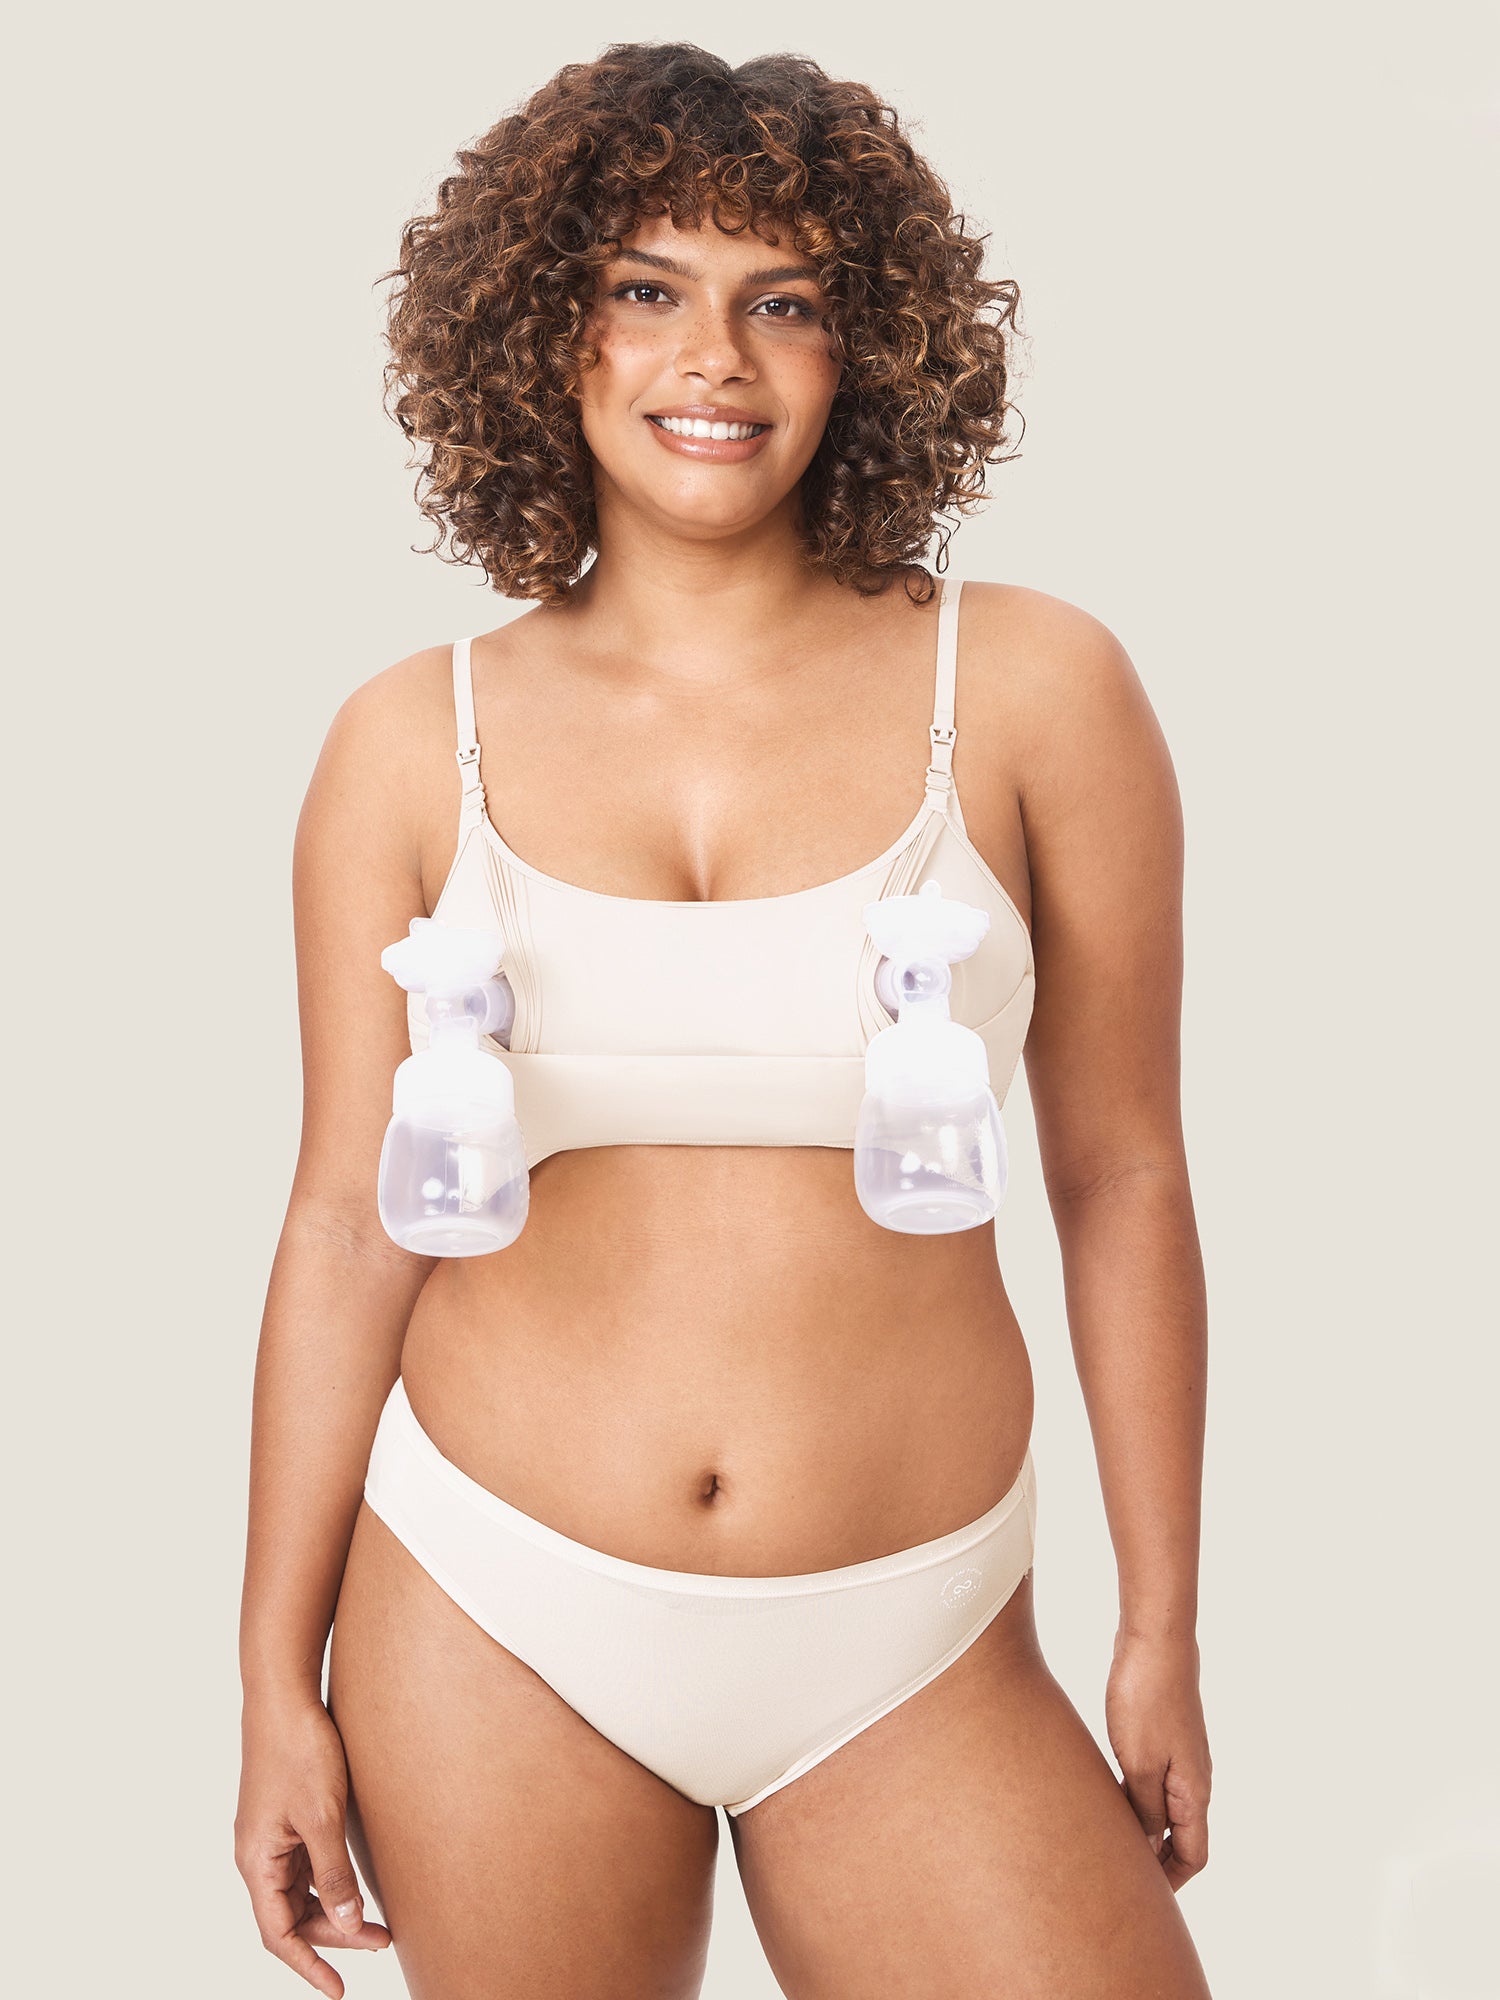 Inbarely® All-In-One Pumping Bra Coconut White